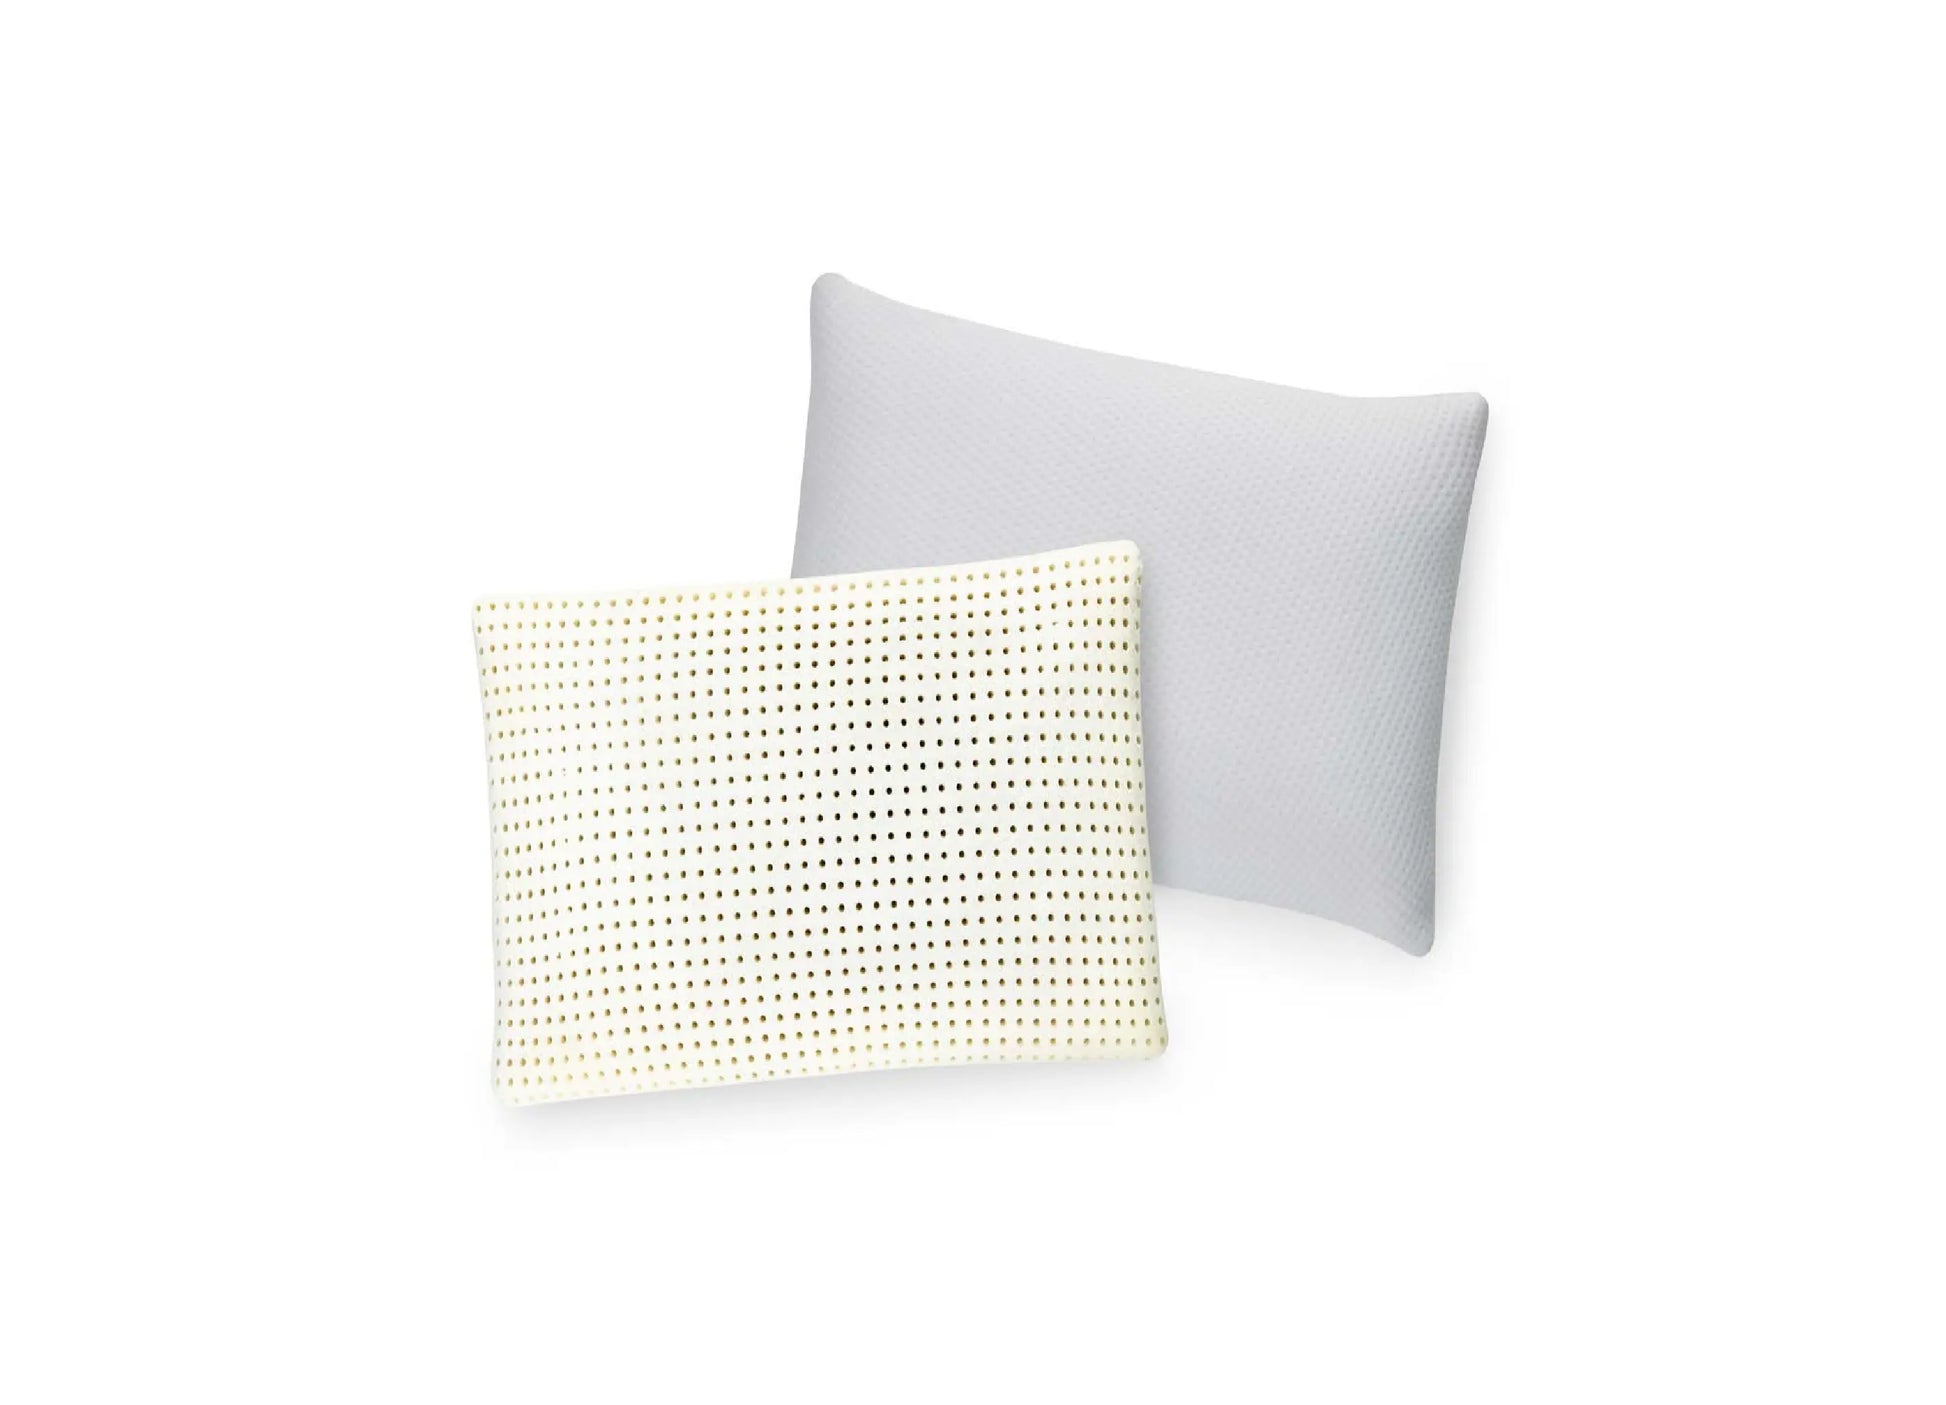 Ventilated Memory Foam Pillow house brand private label